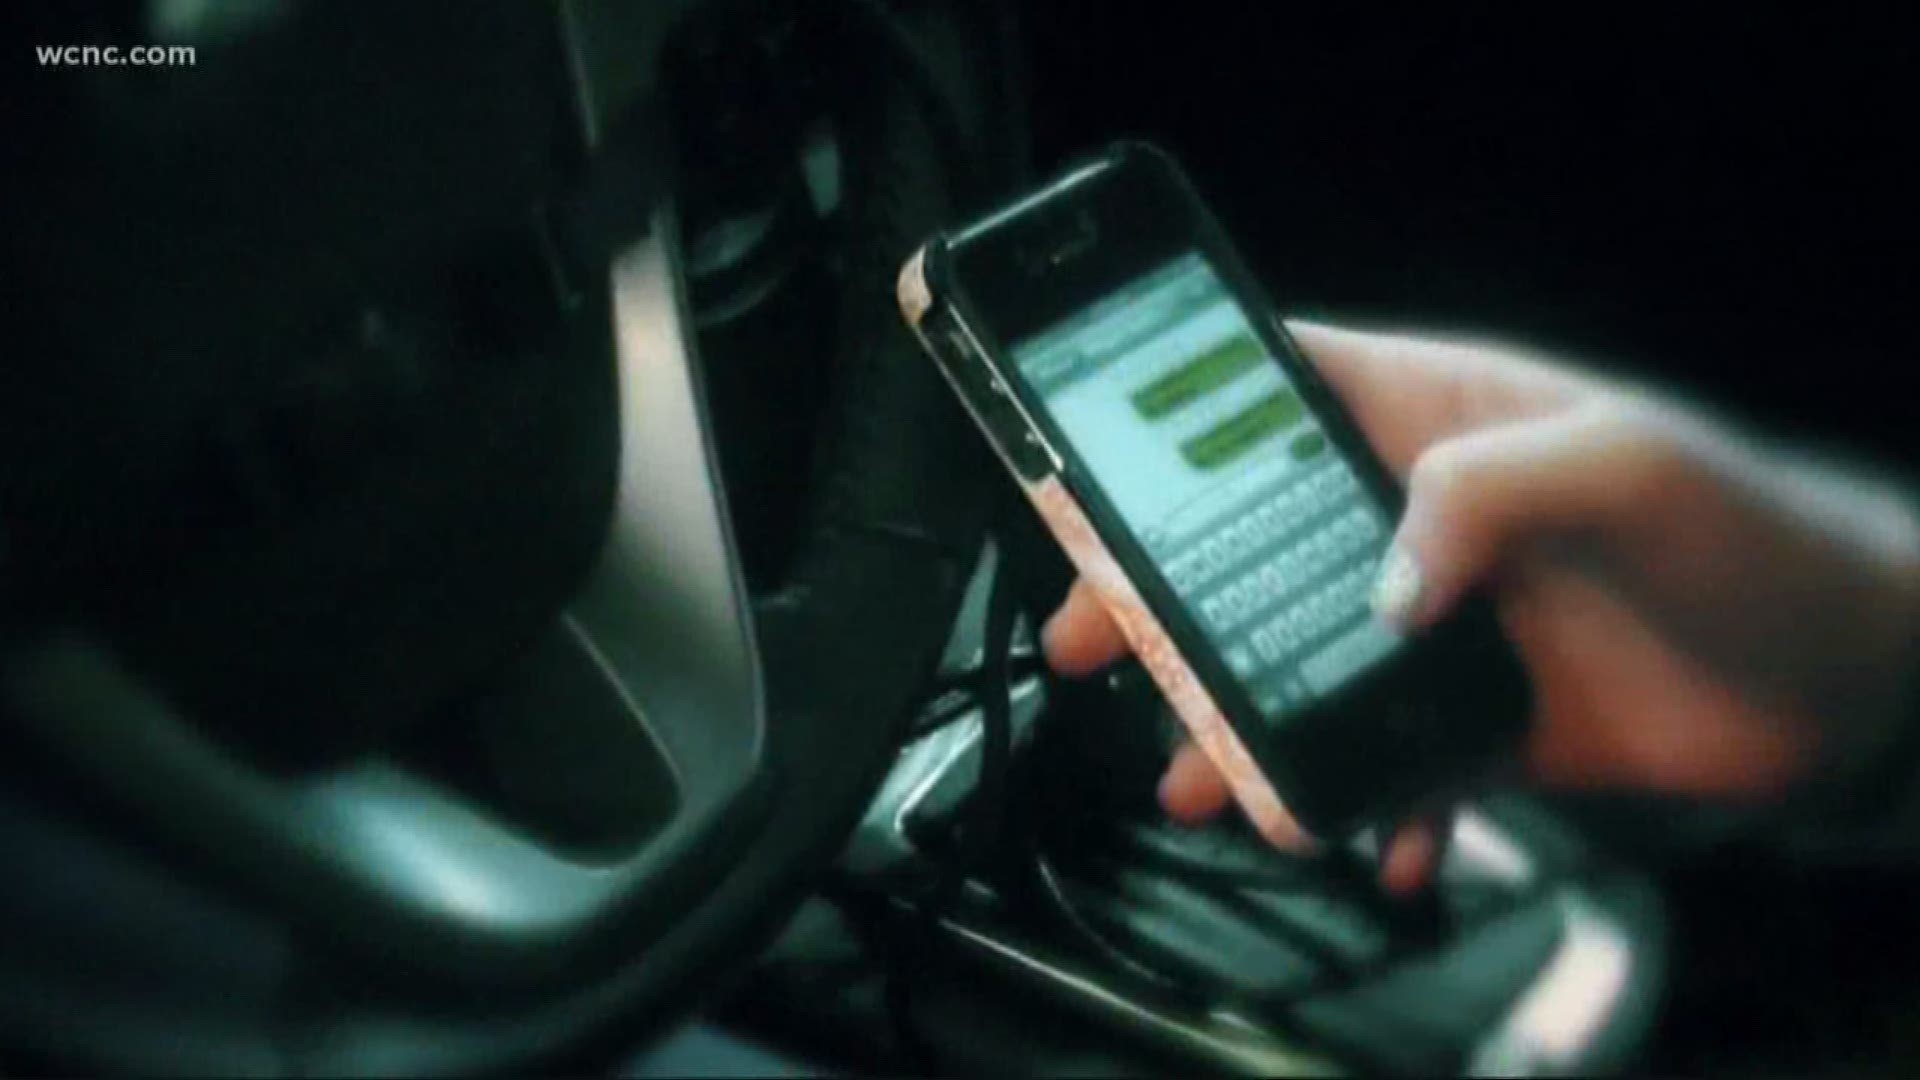 Police across the area are facing a lot of challenges when it comes to distracted driving cases.